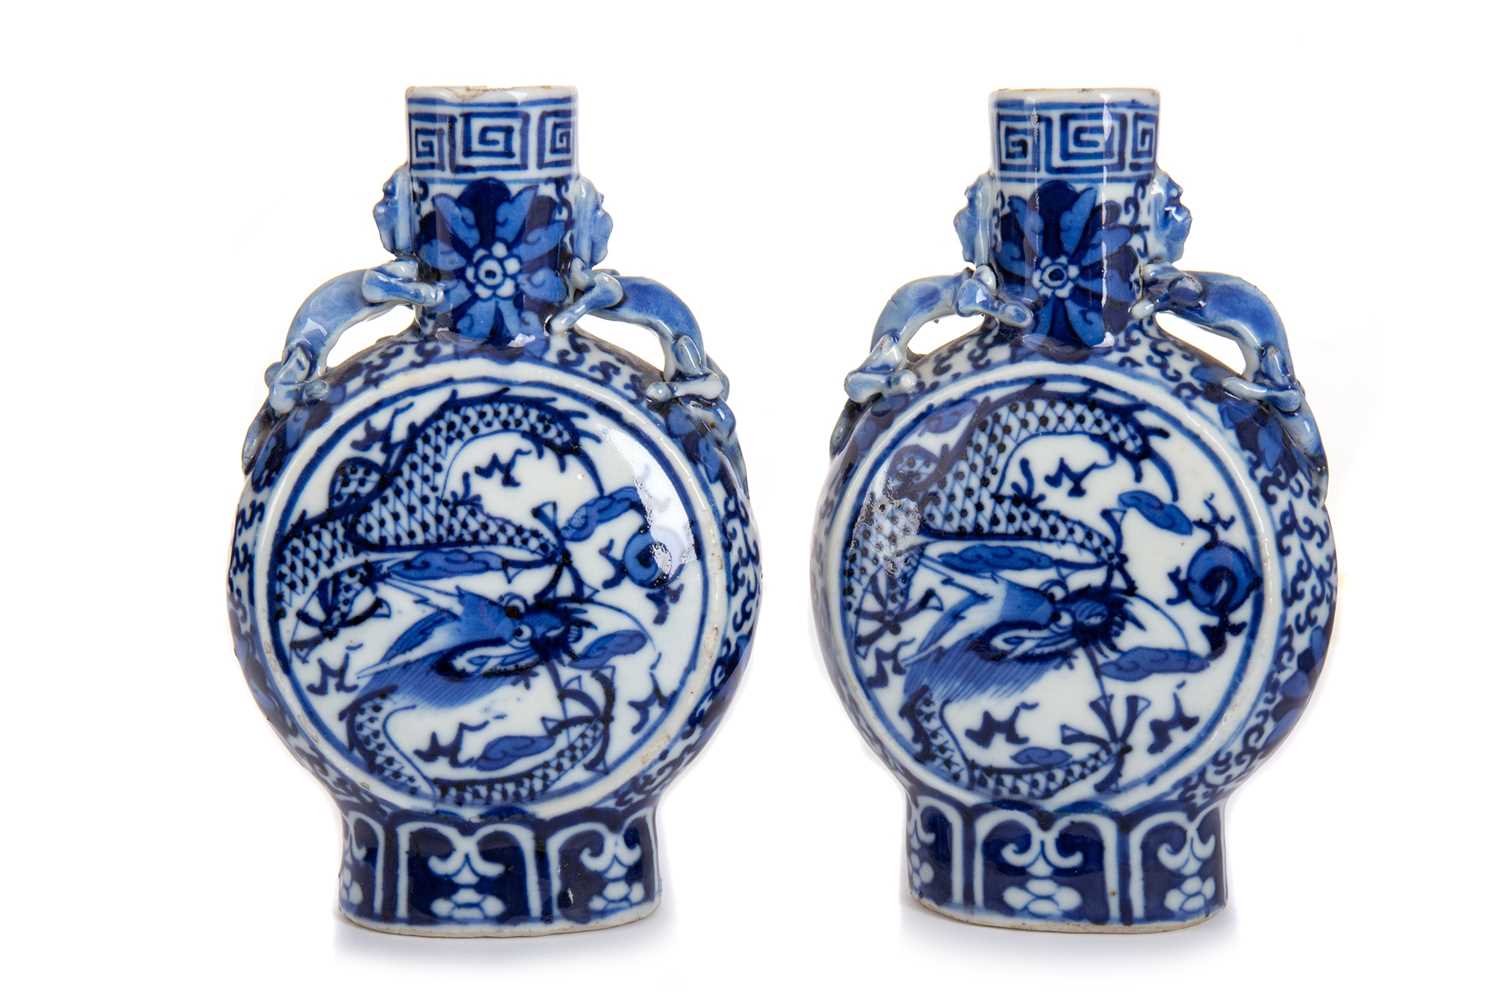 PAIR OF CHINESE BLUE AND WHITE MOONFLASKS, LATE 19TH/EARLY 20TH CENTURY